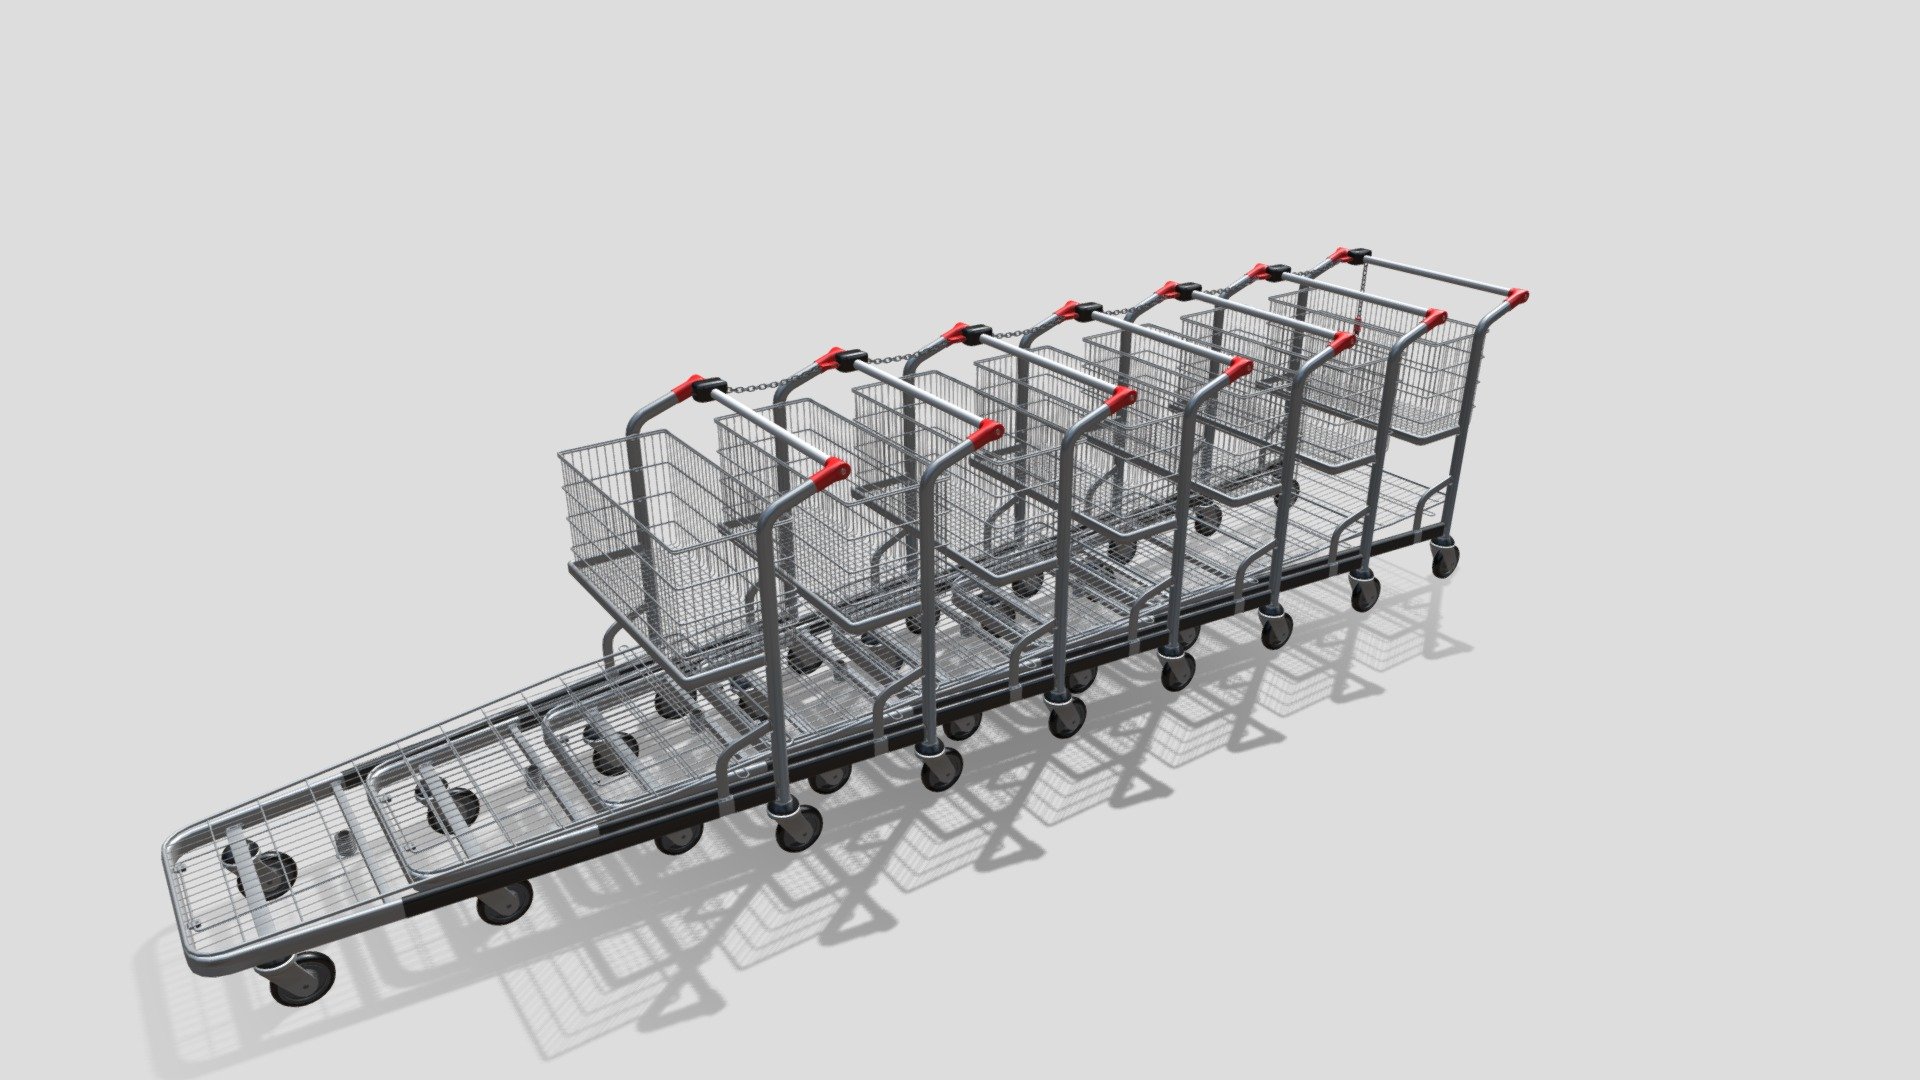 Shopping cart stack 3d model rendered with Cycles in Blender, as per seen on attached images. 
The model is scaled to real-life scale.

File formats:
-.blend, rendered with cycles, as seen in the images;
-.obj, with materials applied;
-.dae, with materials applied;
-.fbx, with material slots applied;
-.stl;

There are two sets of files, one with the stacks of trolleys, and one with single trolleys.
Files come named appropriately and split by file format.

3D Software:
The 3D model was originally created in Blender 2.8 and rendered with Cycles.

Materials and textures:
PBR material is being used, consisting of five 4k image textures (Base/Disp/Metallic/Normal/Roughness). 
Certain 3d softwares can possibly need texture re-assigning in order to get the proper material effect 3d model